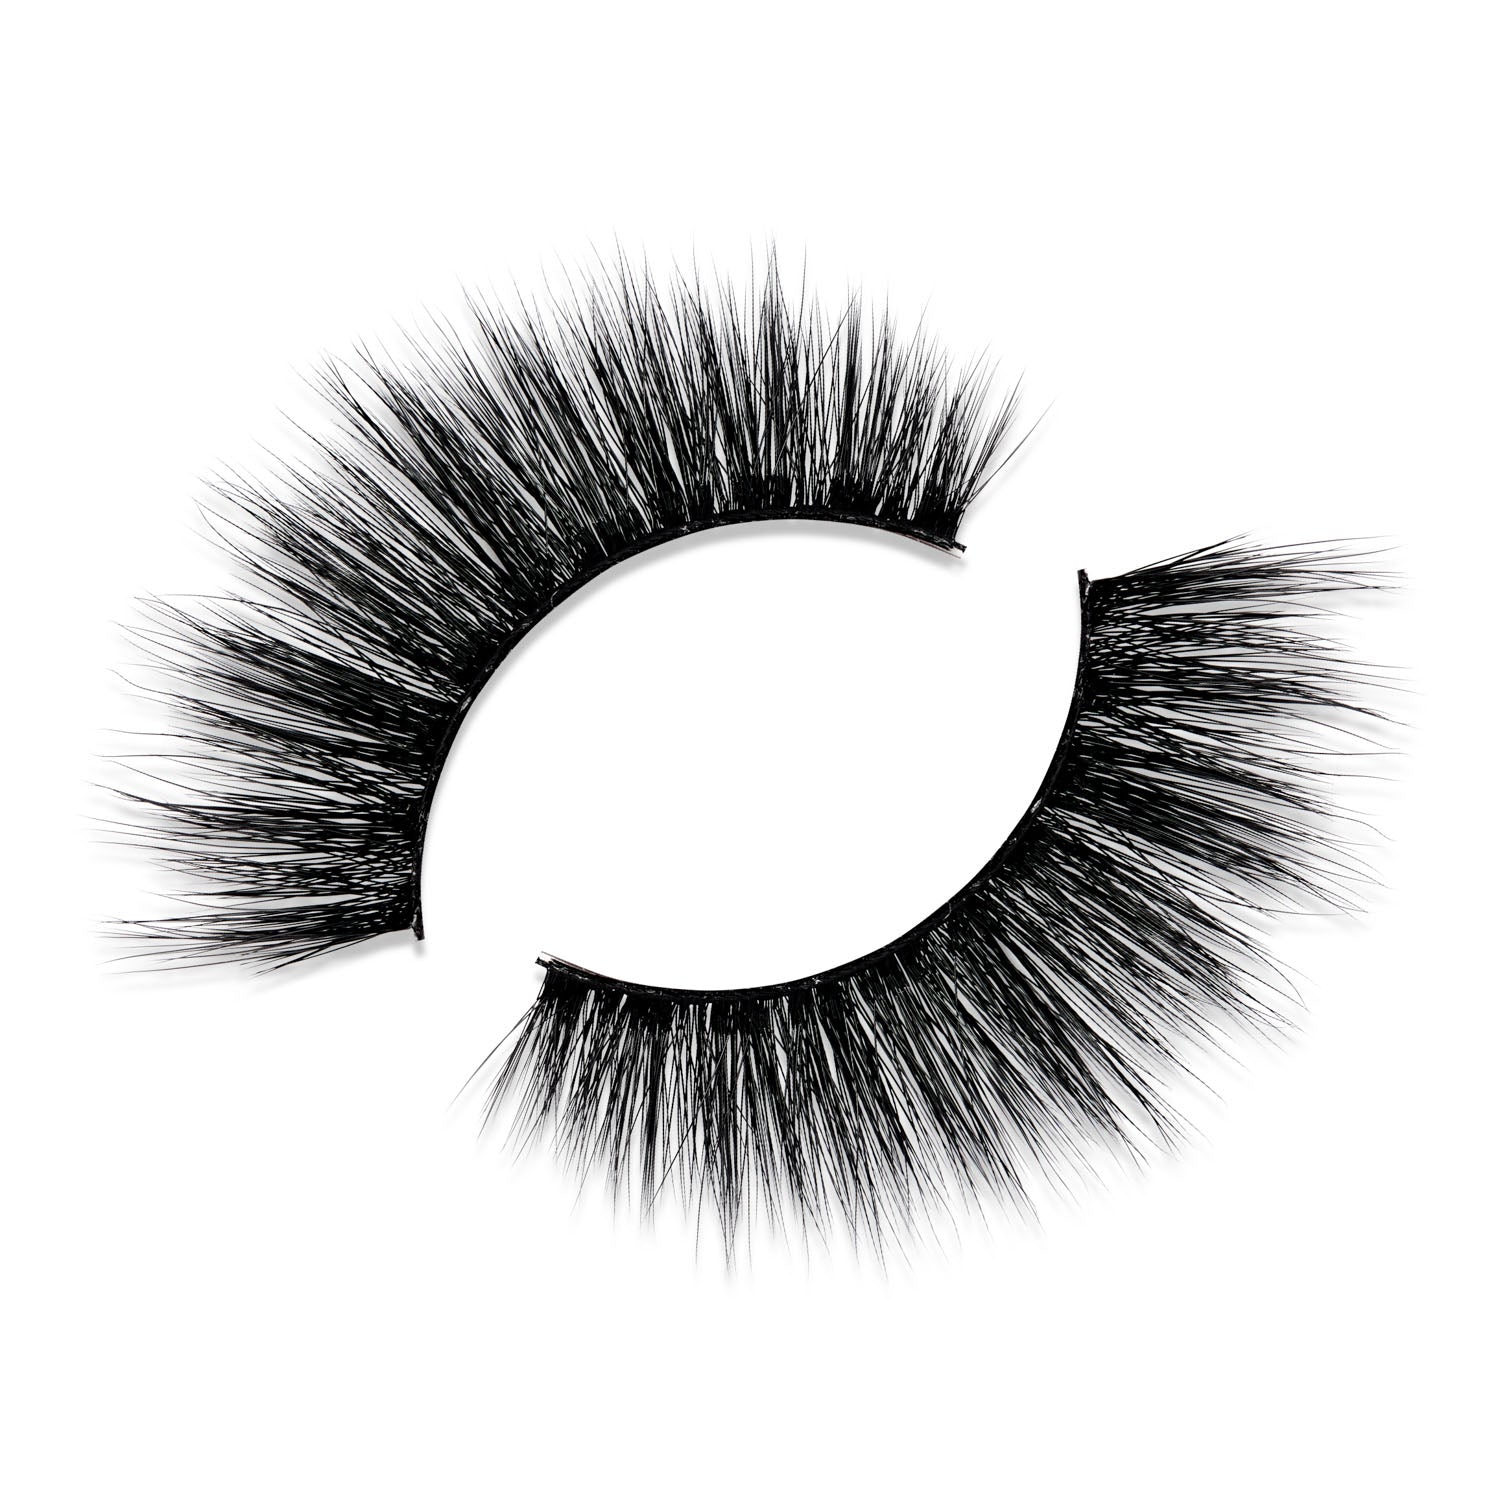 Professional (Dainty) Multi Layer Strip Lashes #D21